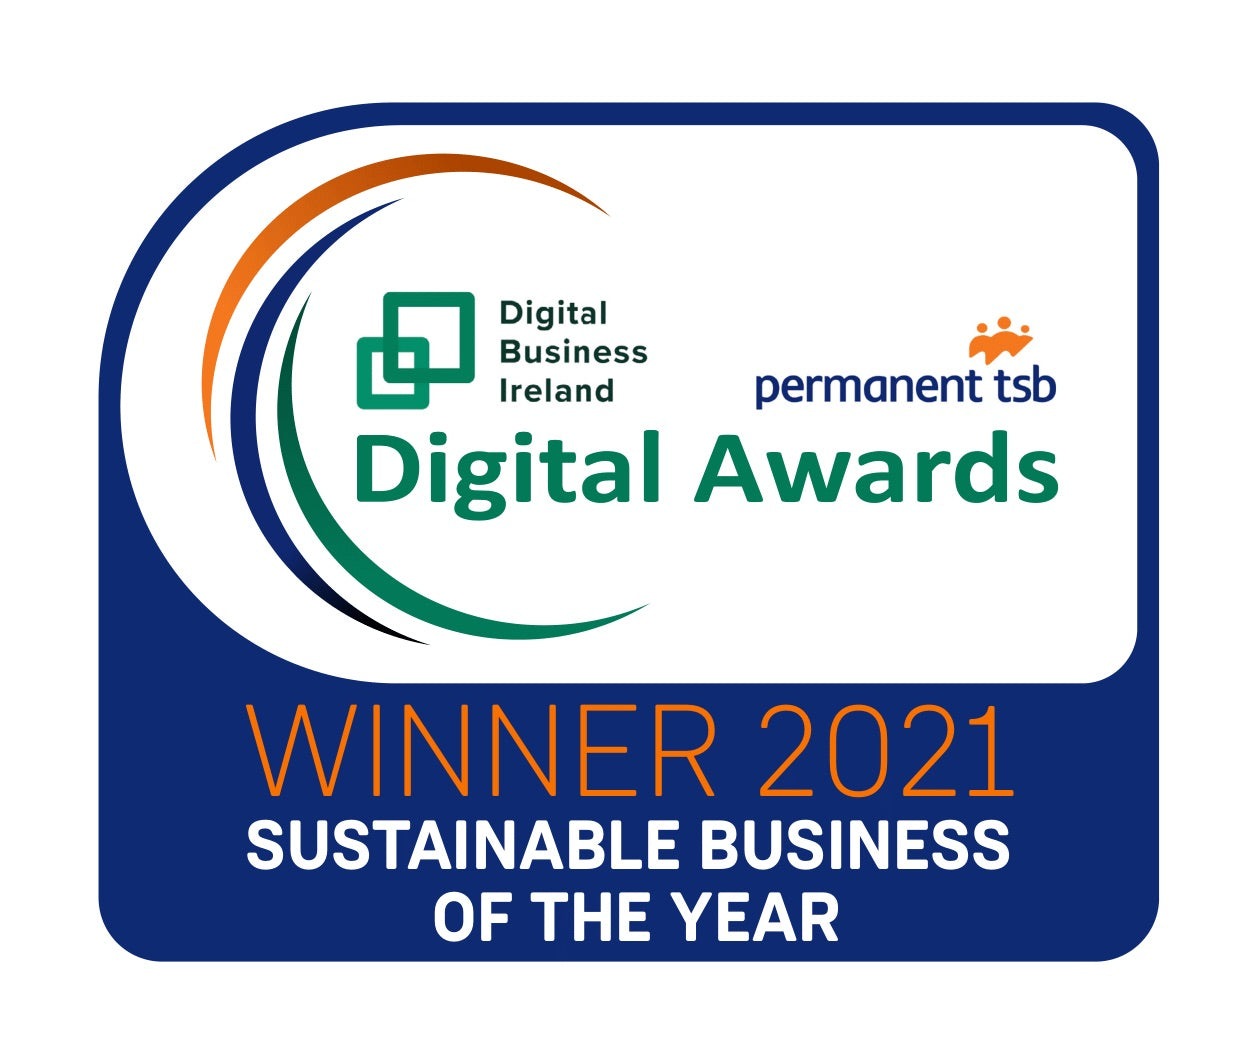 Sustainable Business of the Year!